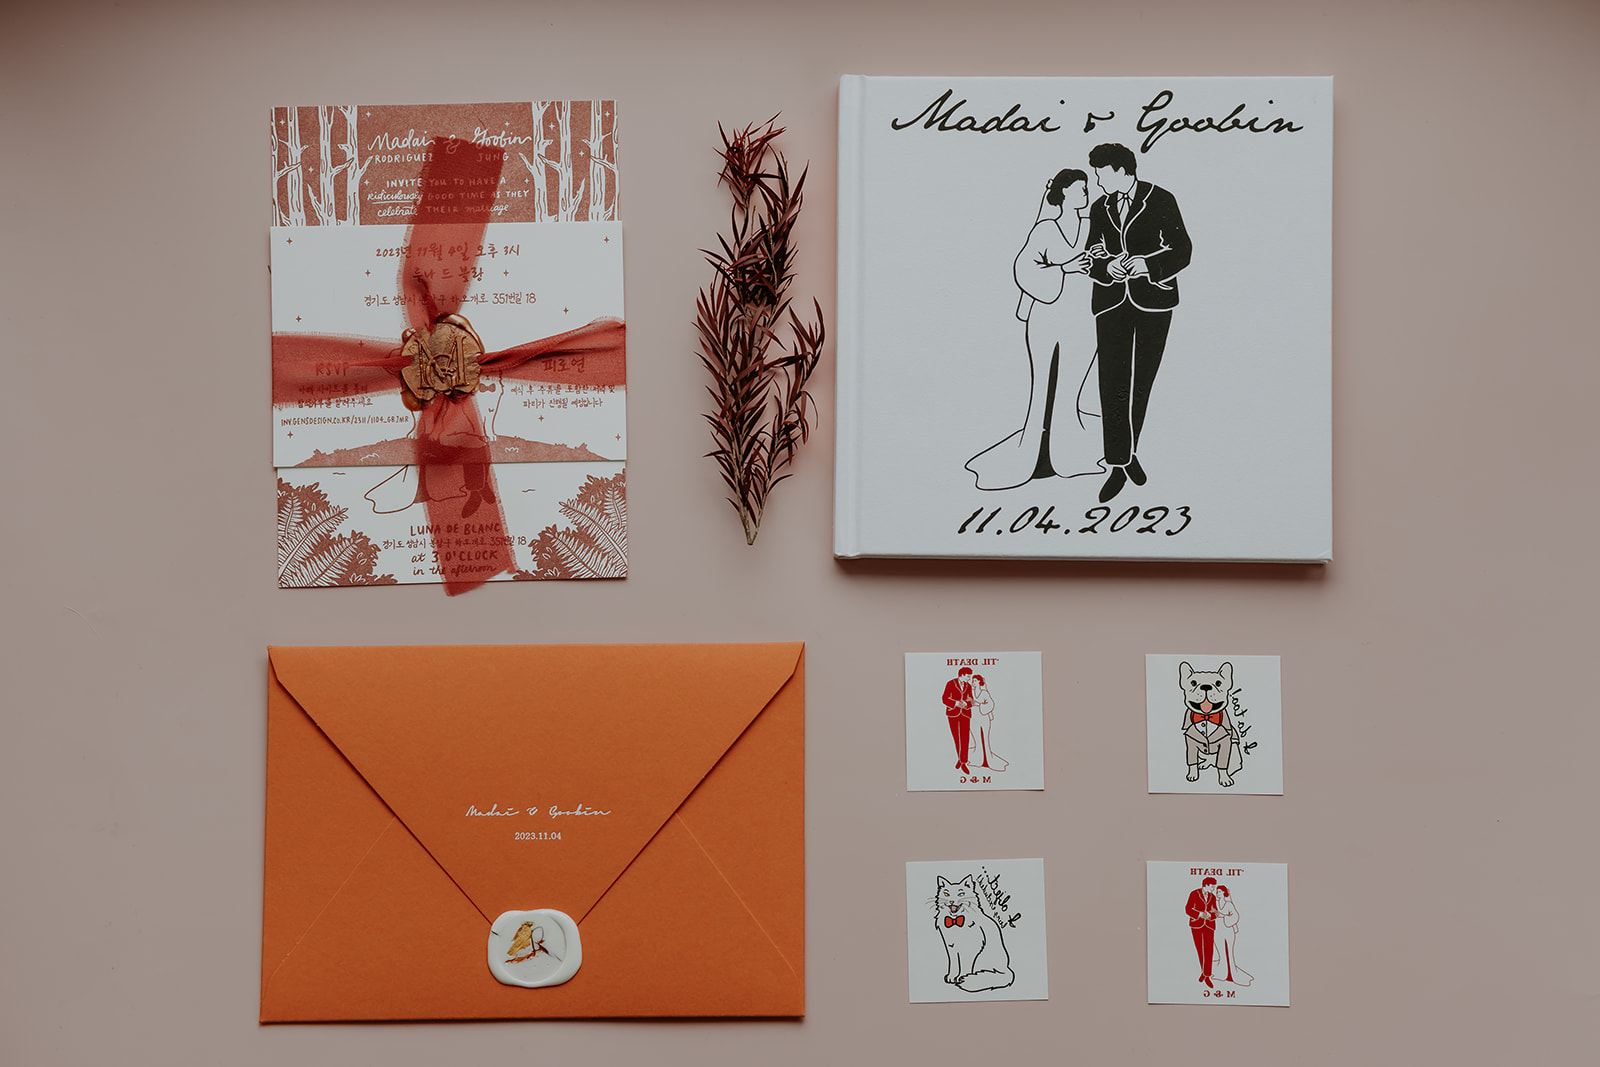 Wedding invitation suite featuring an orange envelope, invitation card with red wax seal, guest book, and small cartoon 